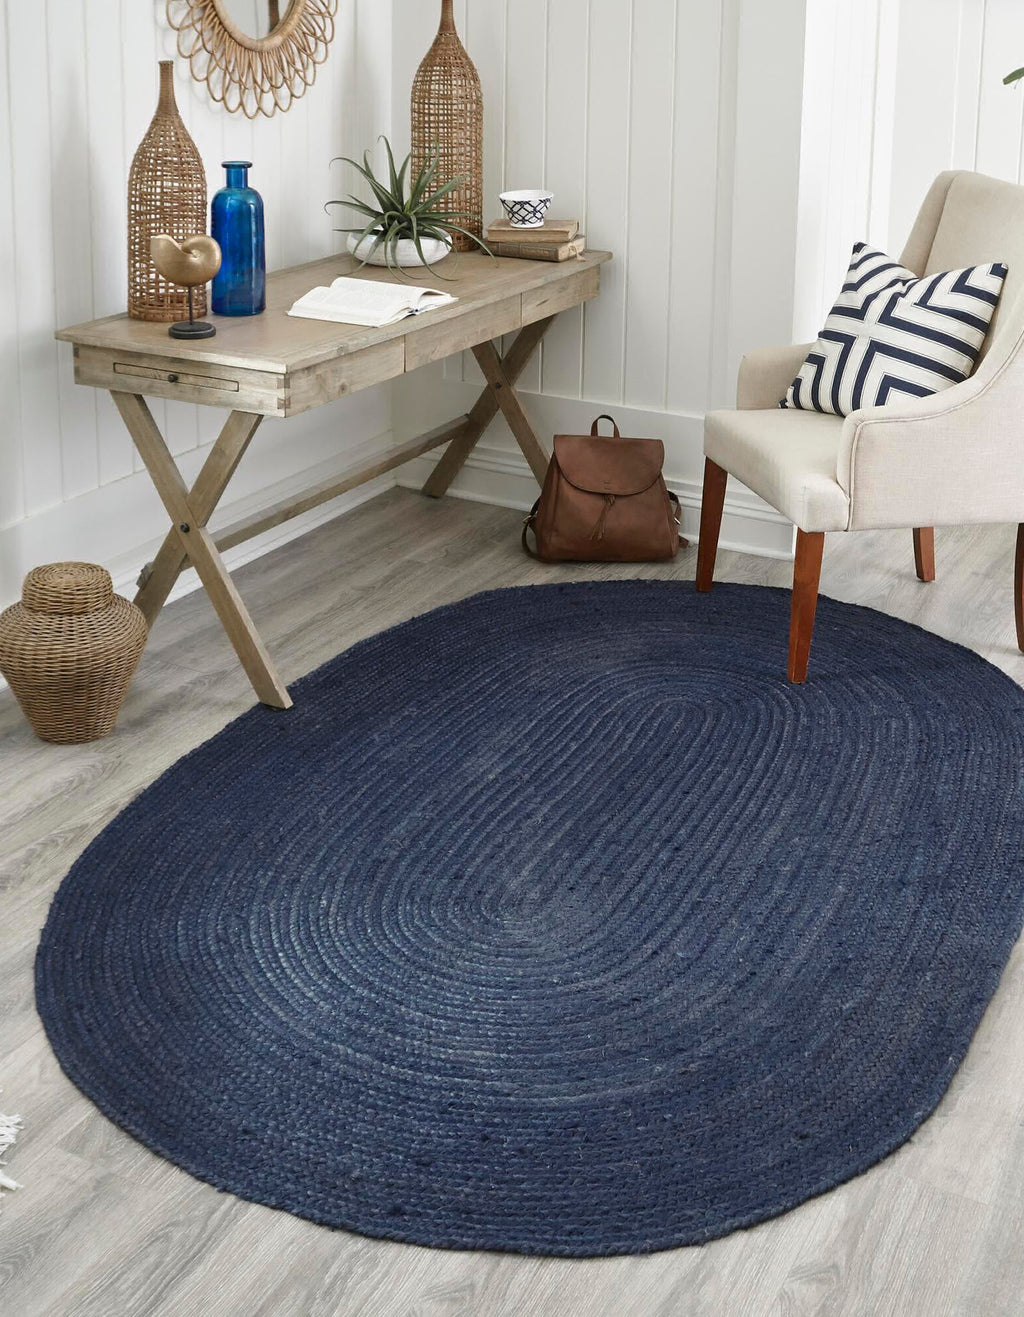 Unique Loom Braided Jute MGN-5-7-8 Navy Blue Area Rug Oval Lifestyle Image Feature